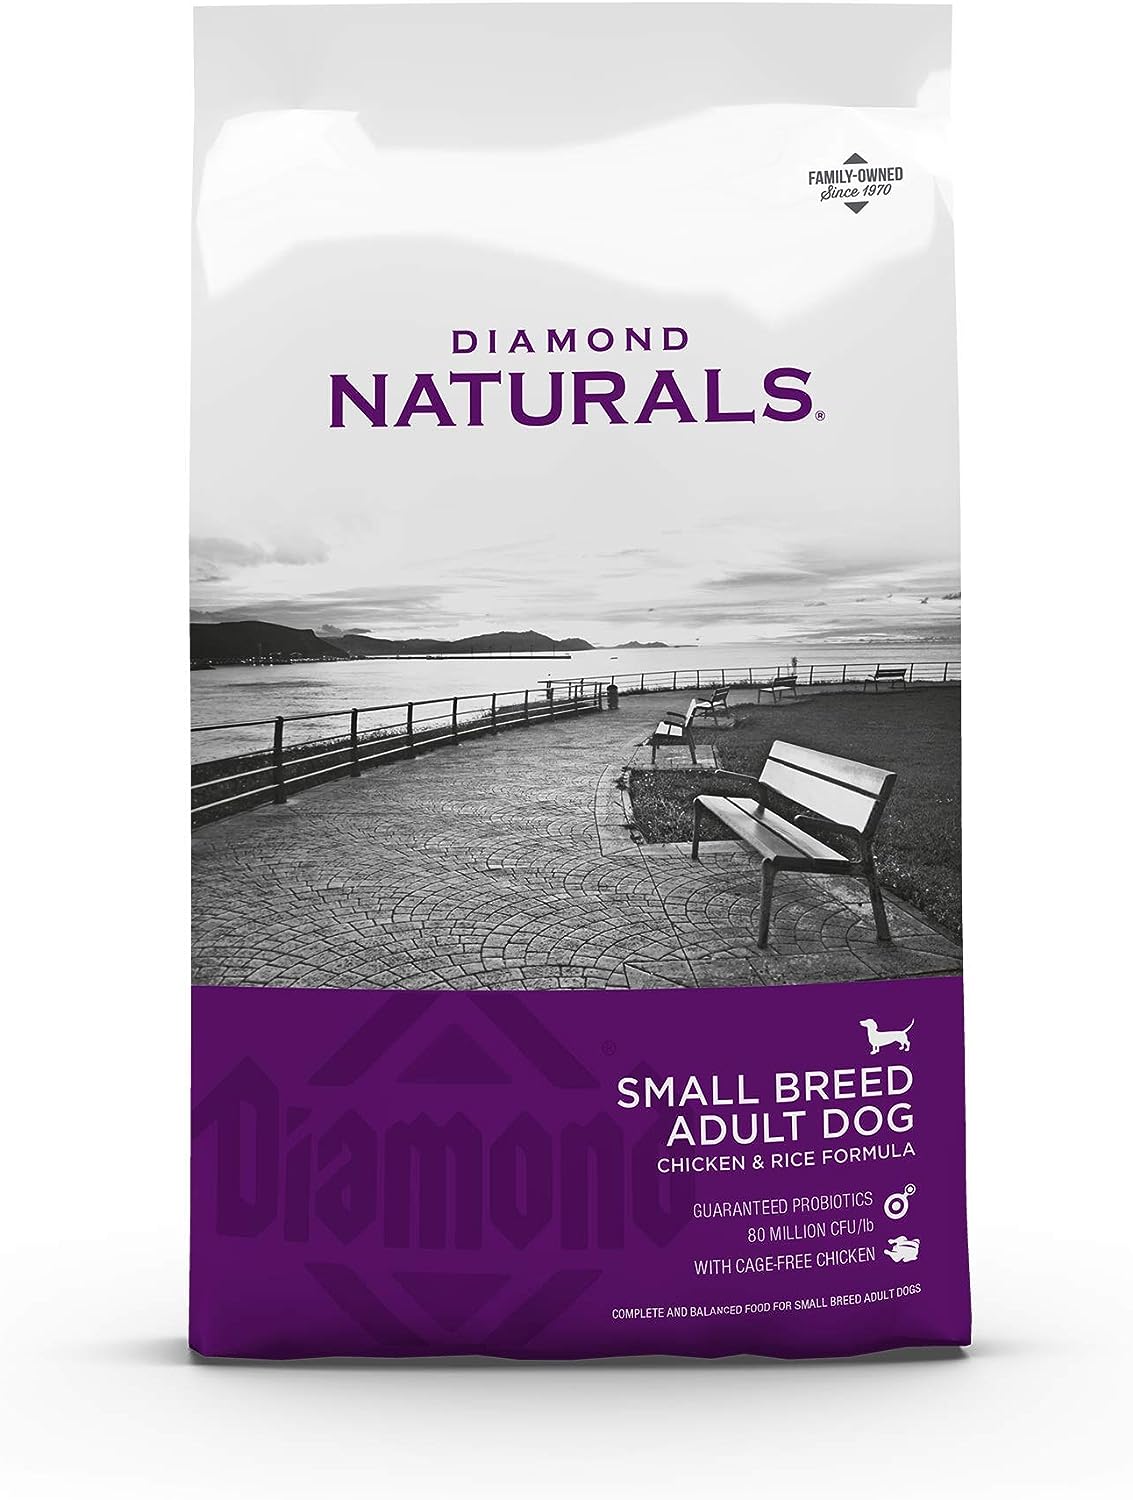 Diamond Naturals Small Breed Adult Dog Chicken & Rice Formula Dry Dog Food – Gallery Image 1